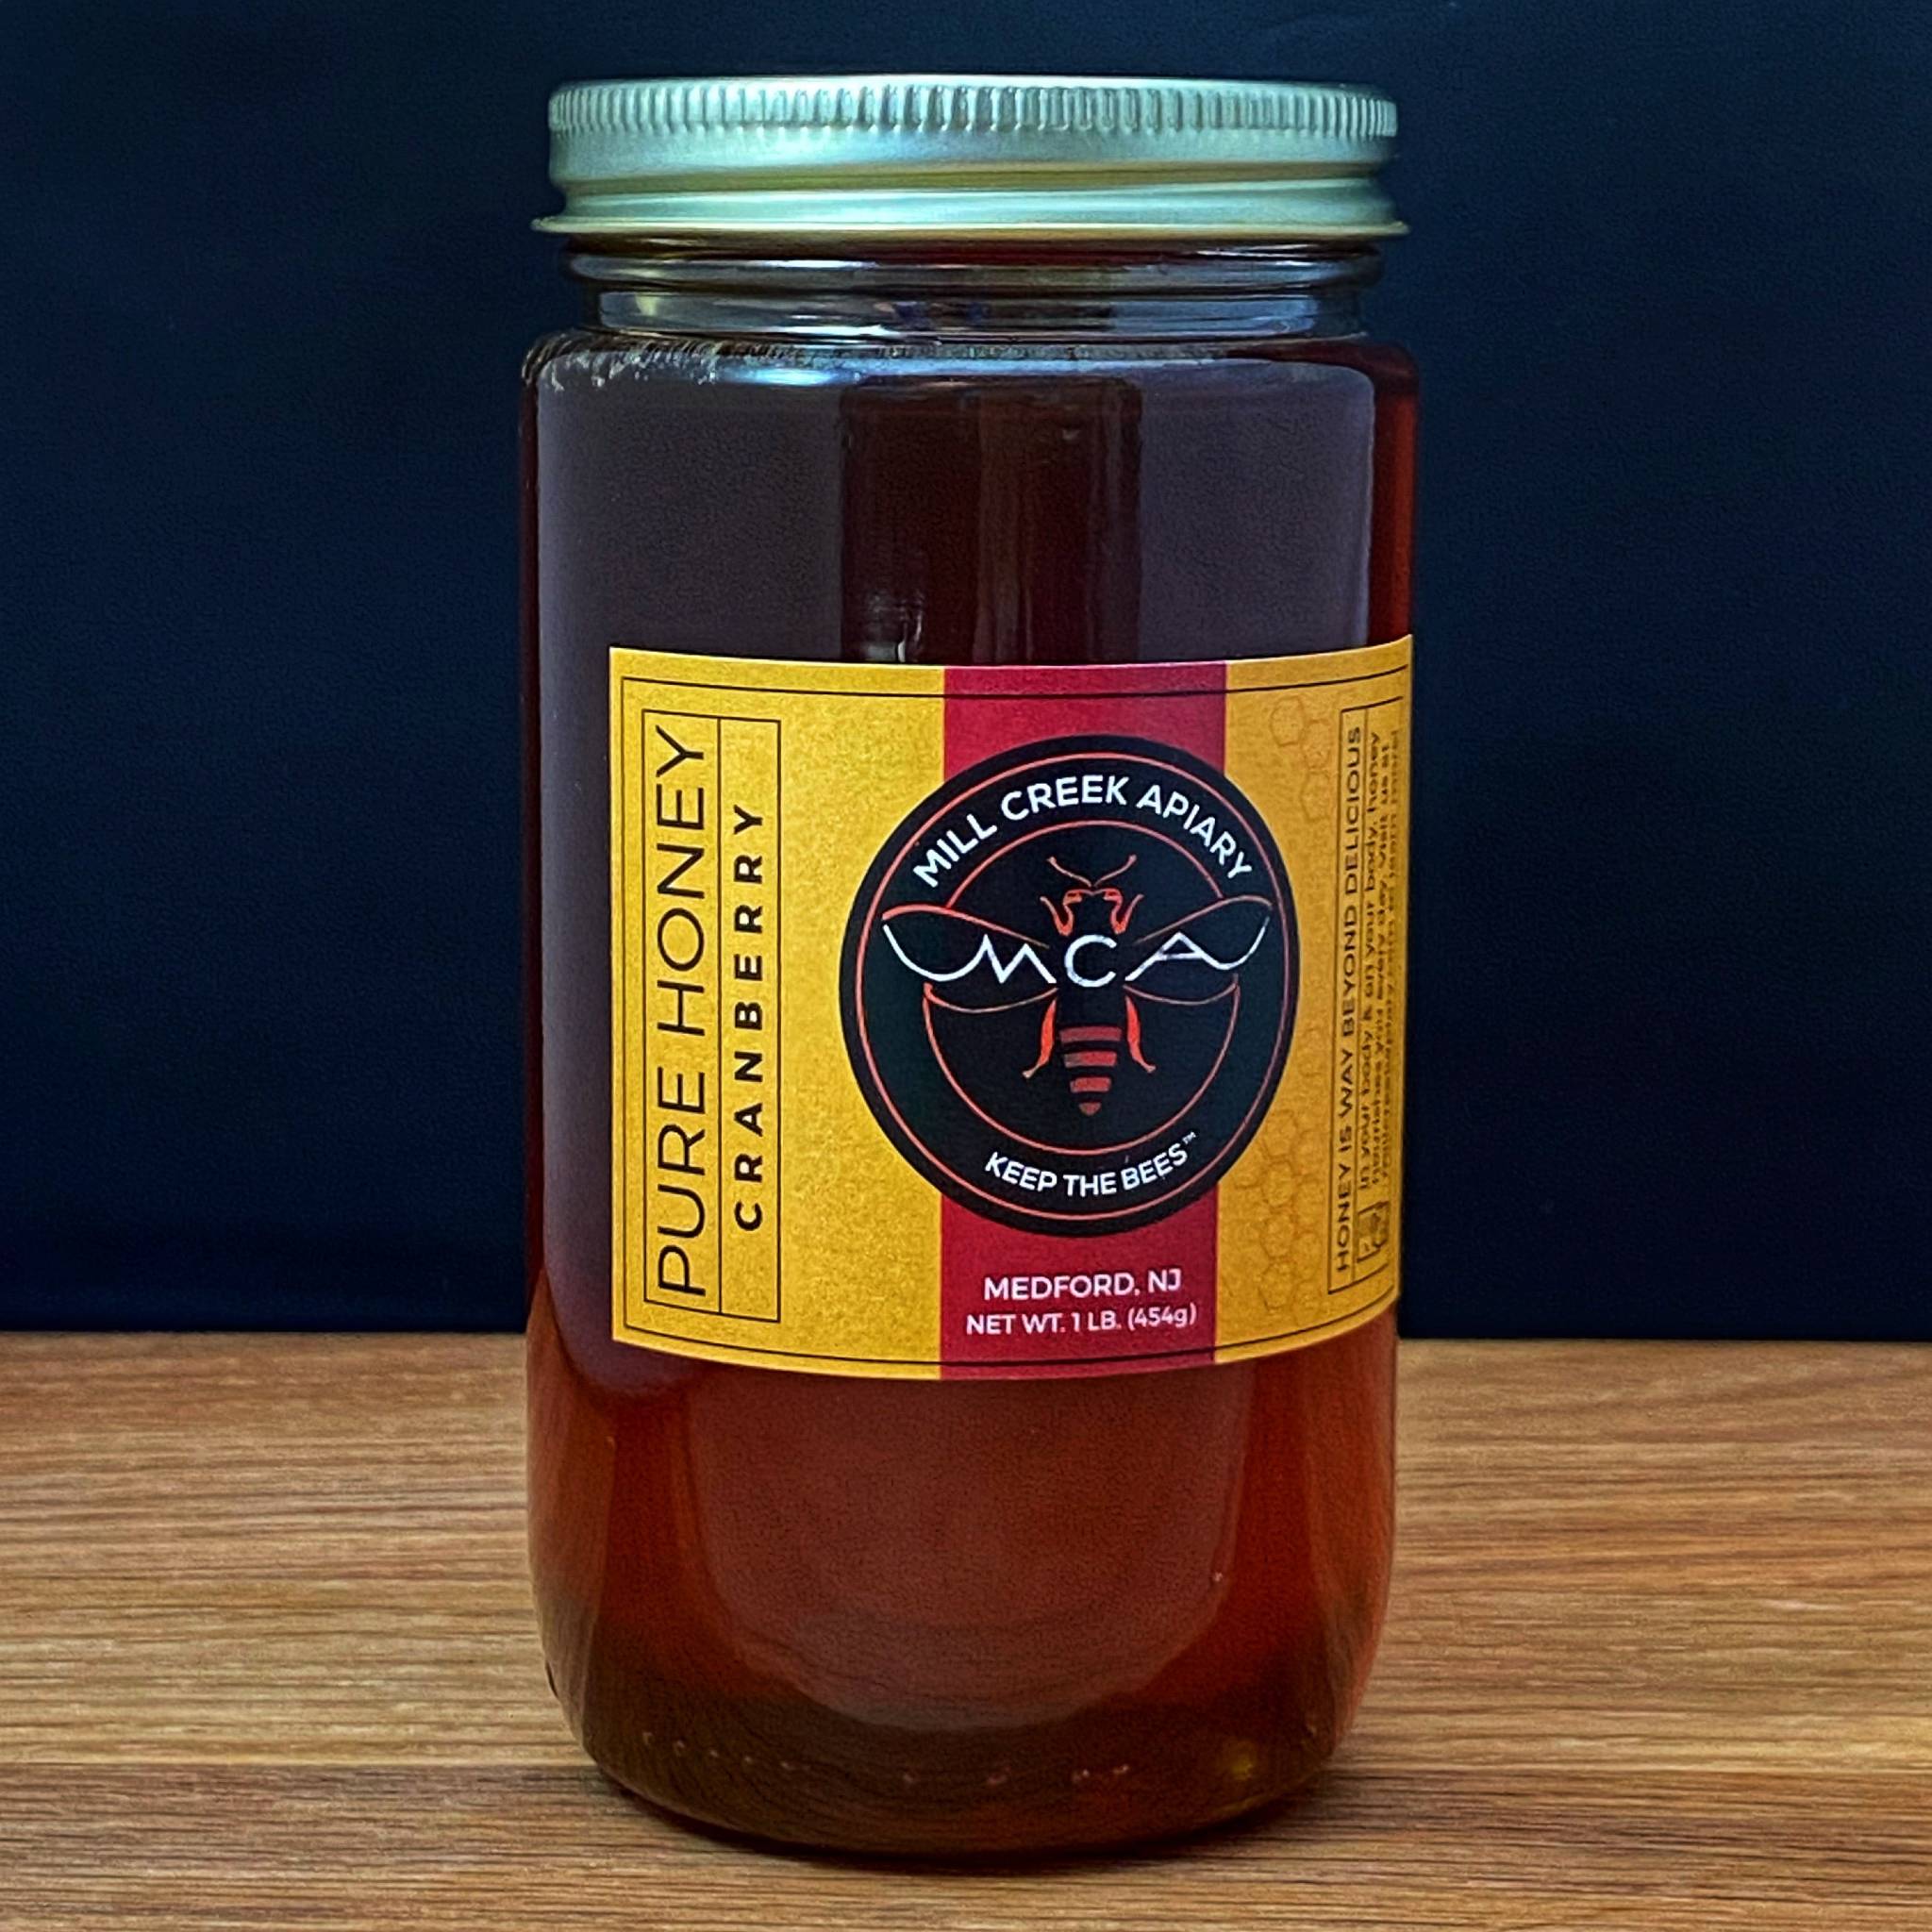 Mill Creek Apiary cranberry honey from the nectar of cranberry blossoms